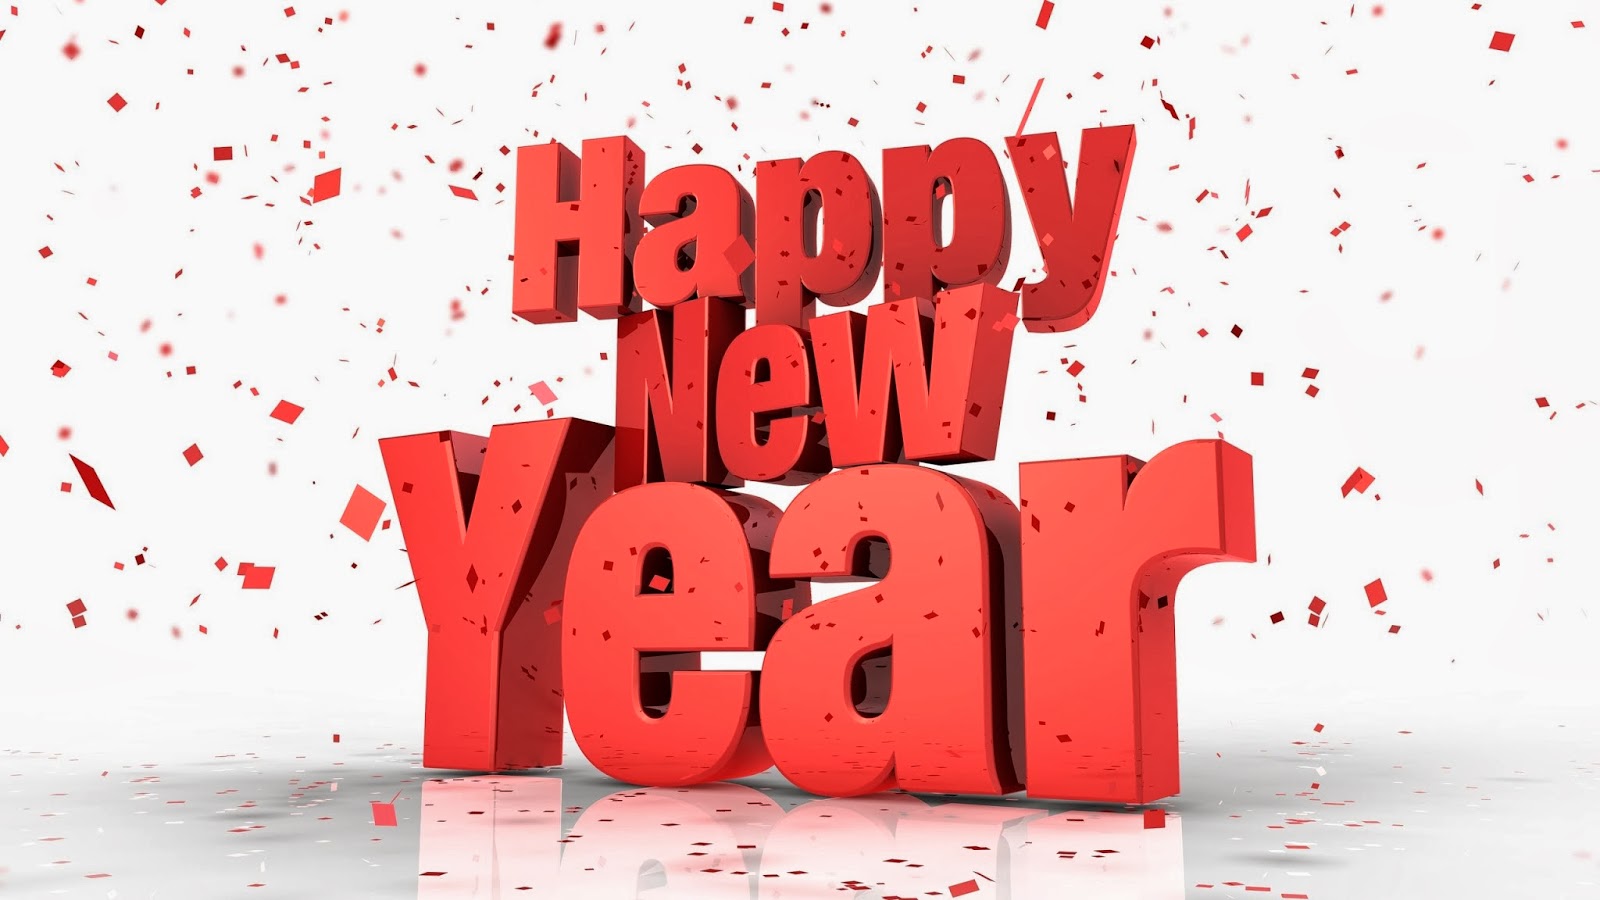 happy new year hd wallpaper download,text,font,red,illustration,graphic design